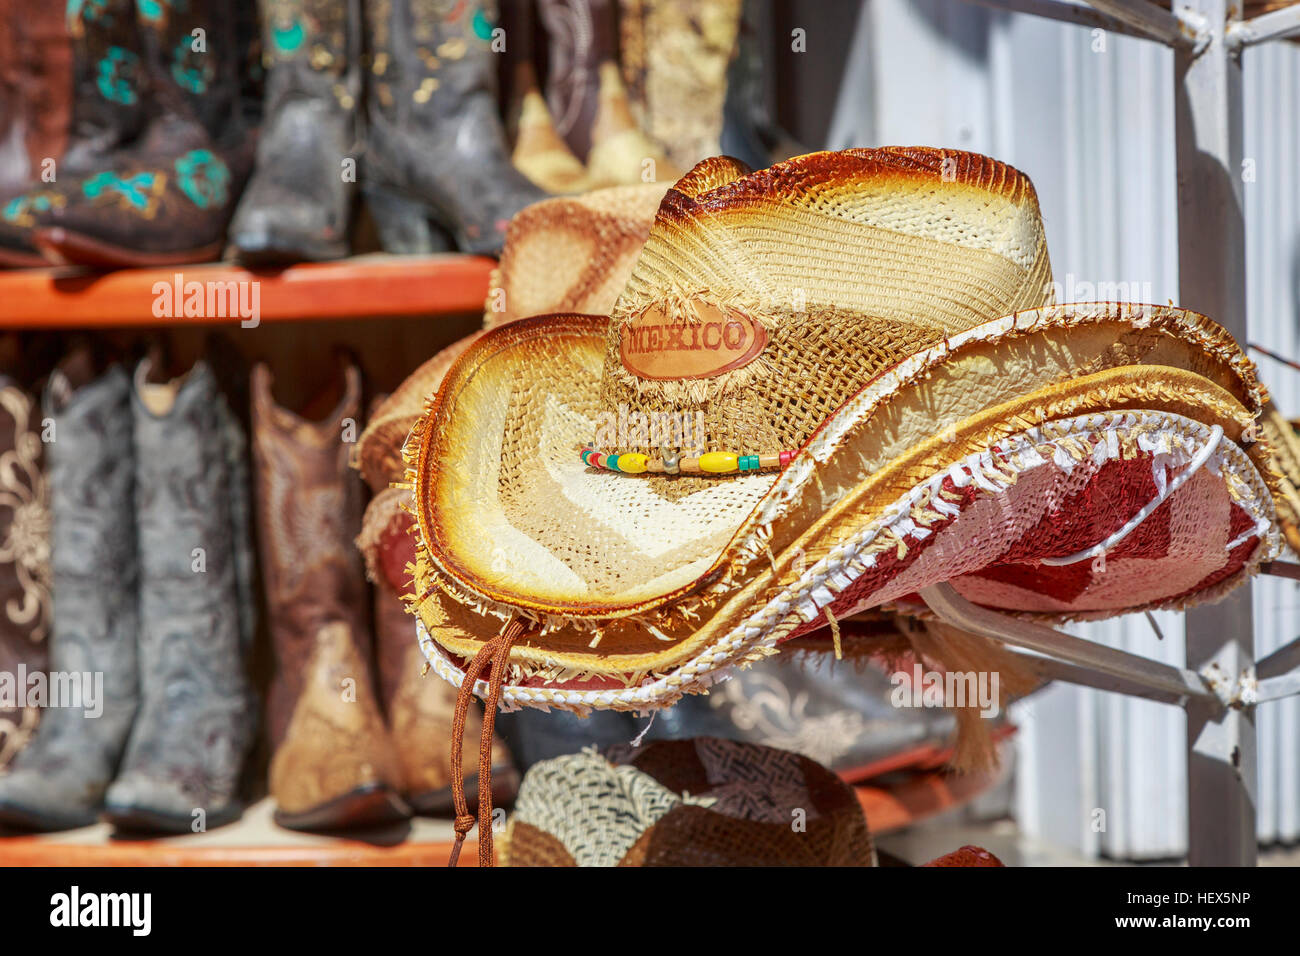 Straw hat embossed with Mexico and multicolored cowboy boots in the background, Playa Del Carmen, Mexico Stock Photo